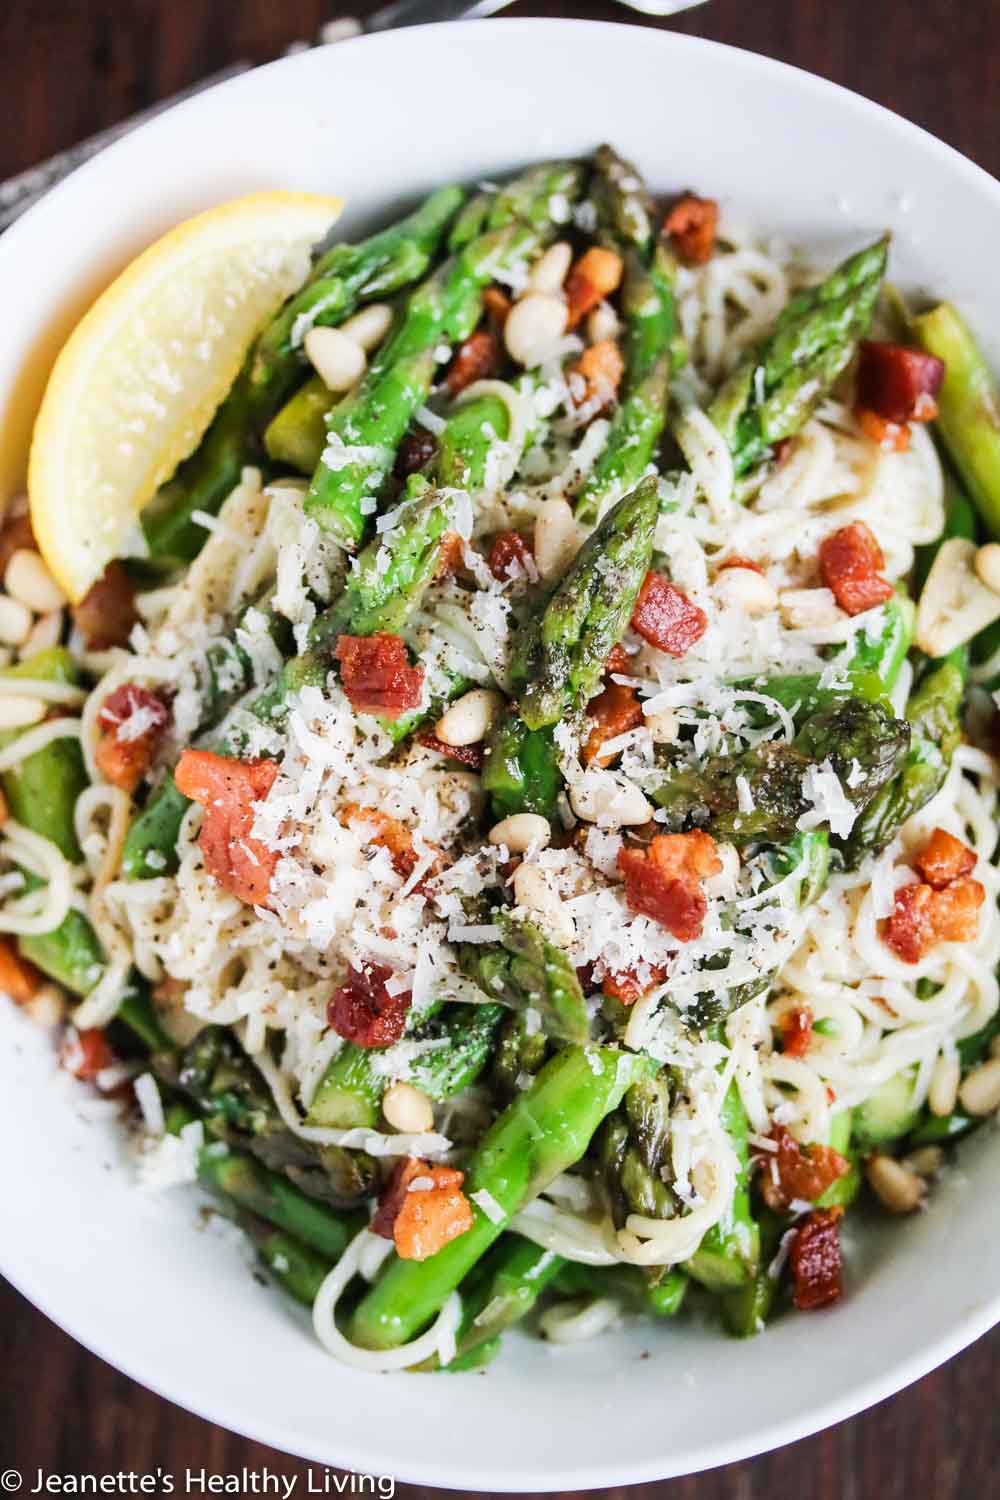 Low-Carb-Pasta-with-Asparagus-Pancetta-Pine-Nuts-2